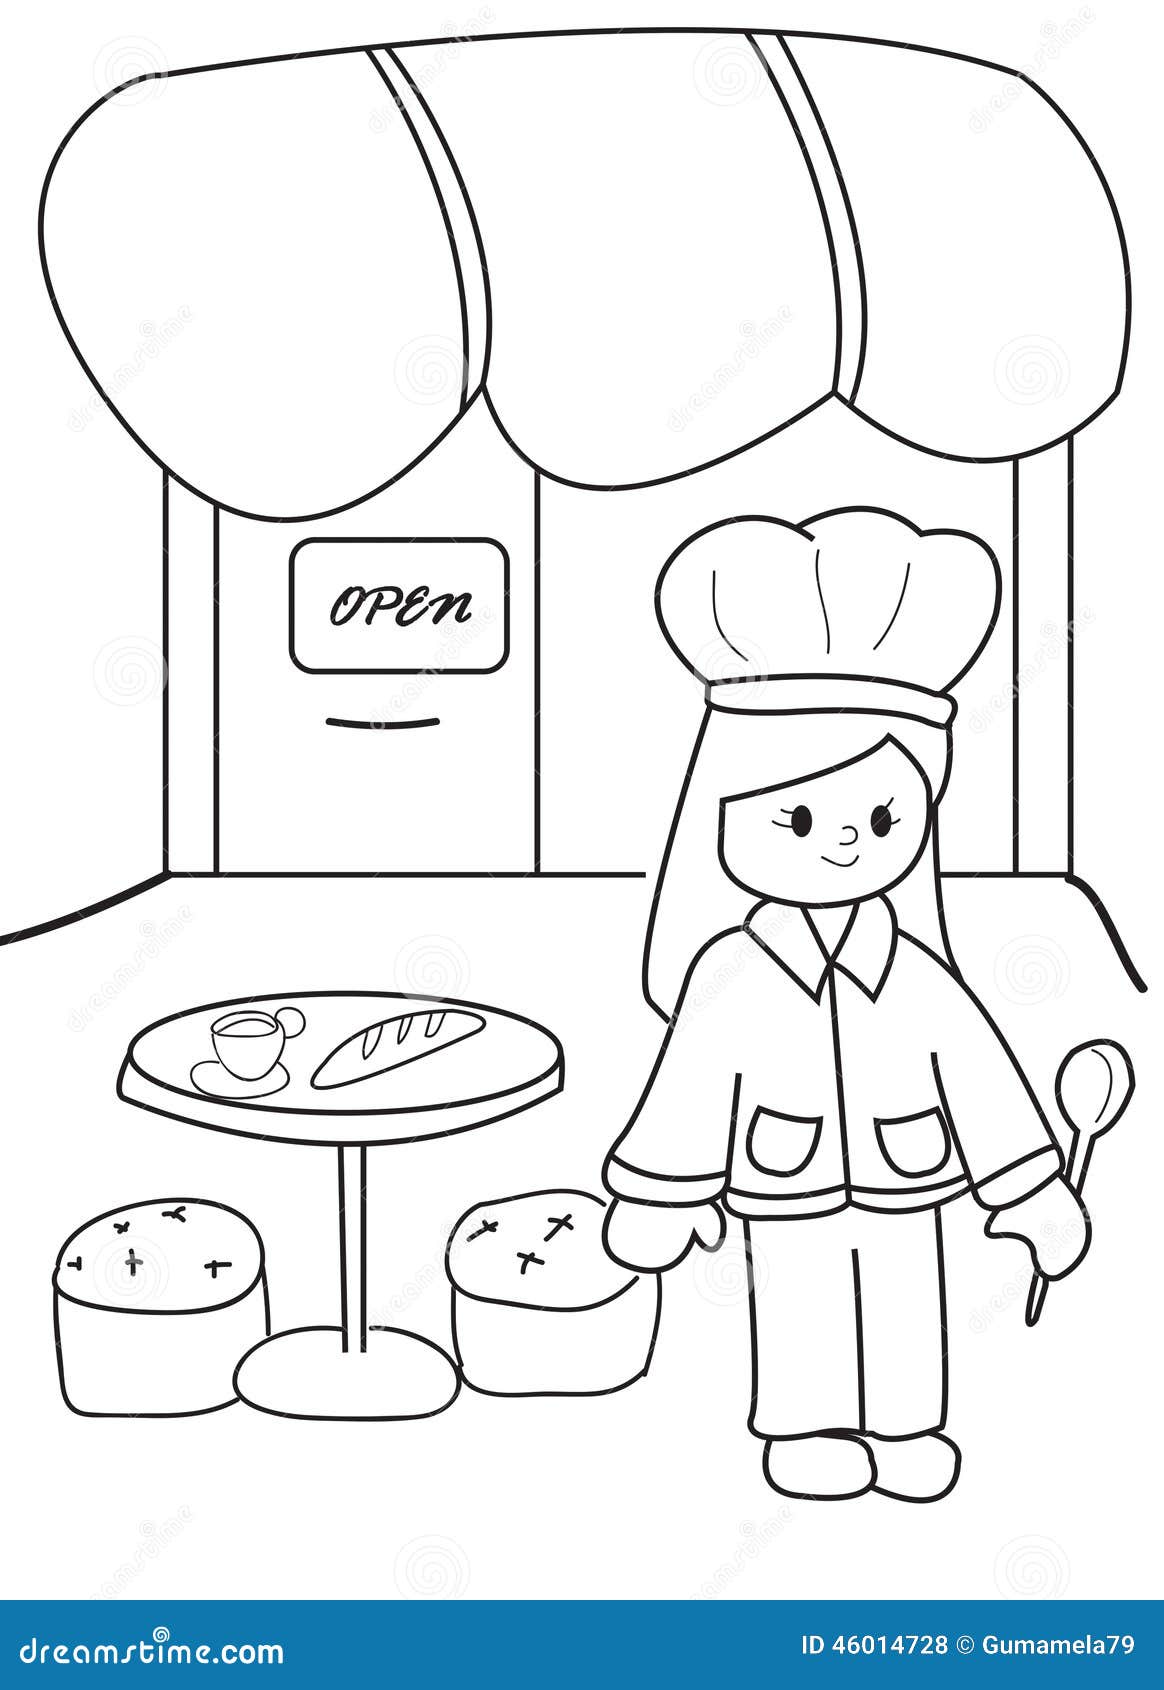 Hand drawn coloring page of a chef at her restaurant stock illustration